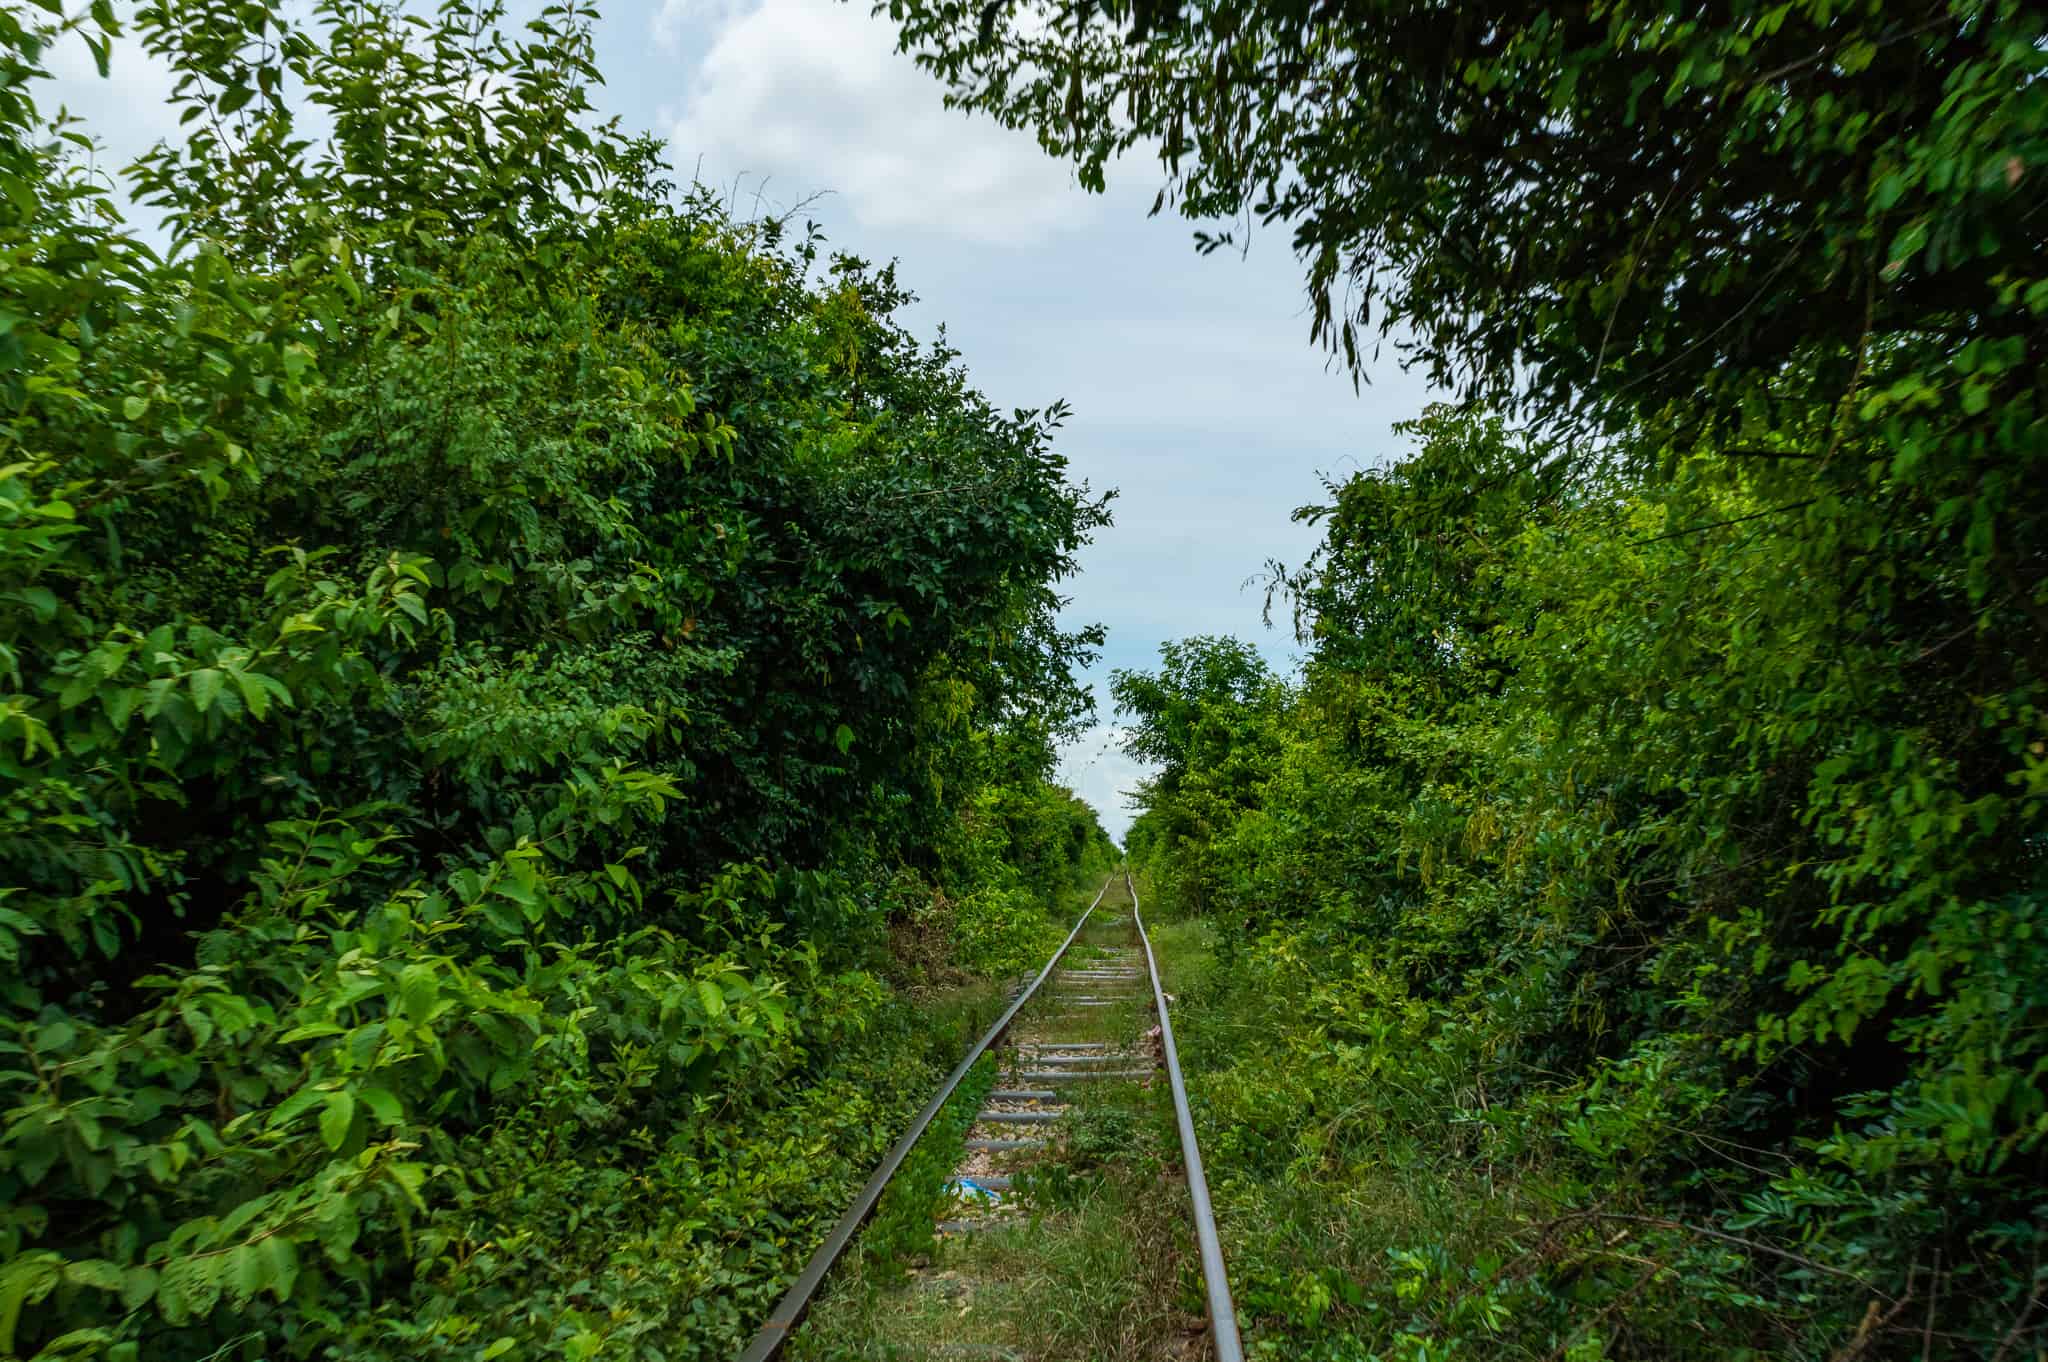 This bamboo train is one of the main attractions to Battambang, Cambodia.